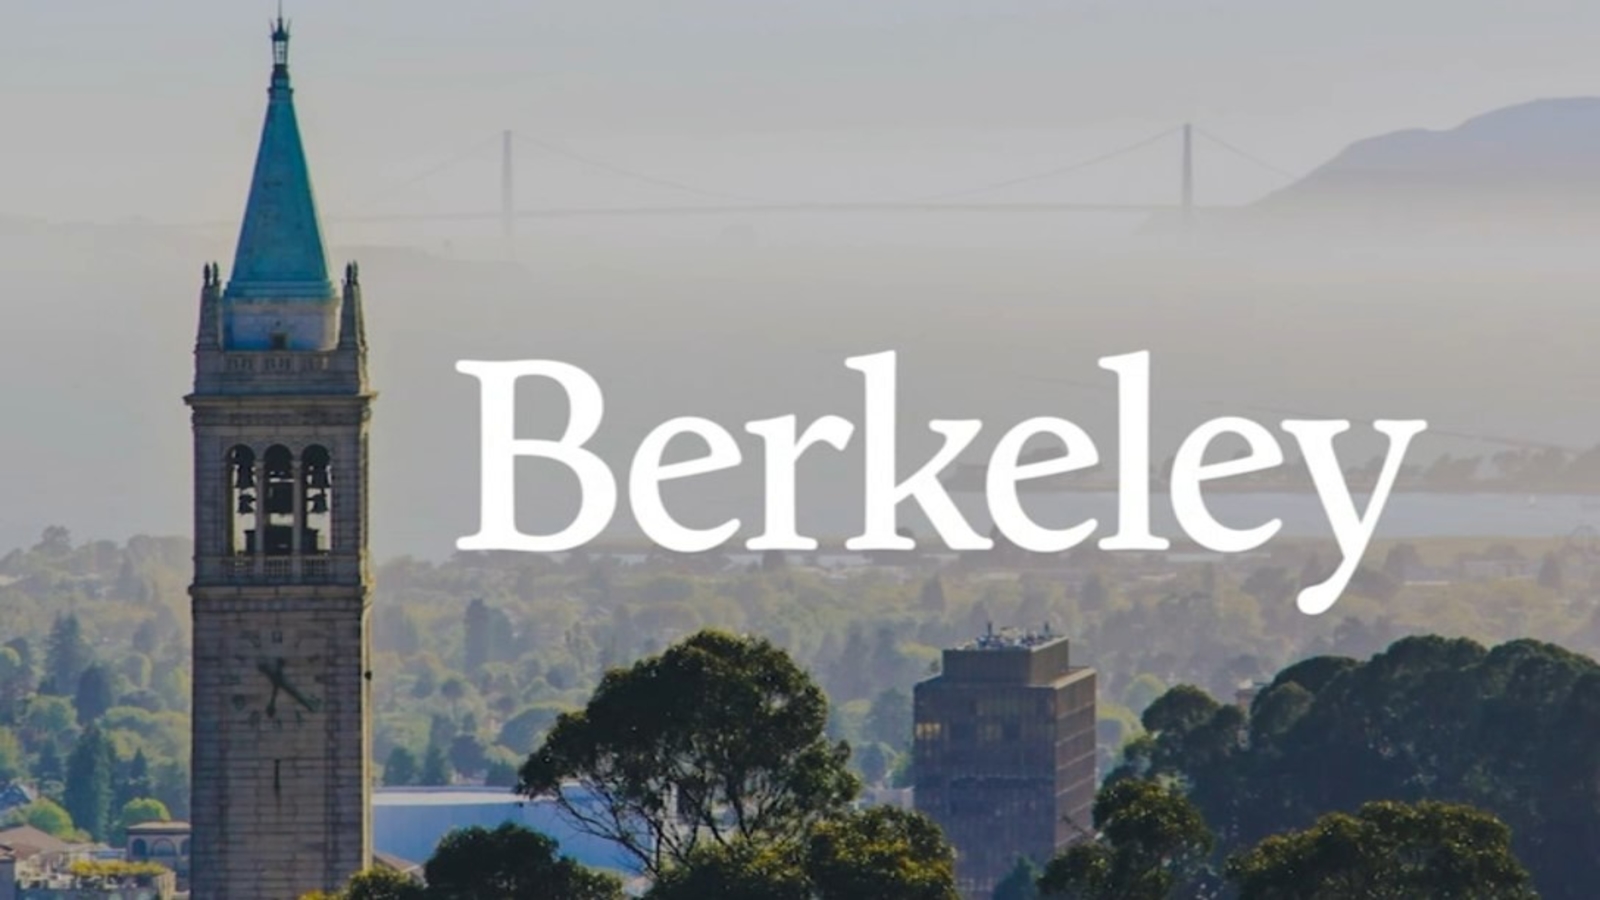 Mixed reaction, confusion over UC Berkeley’s rebrand with new logos [Video]